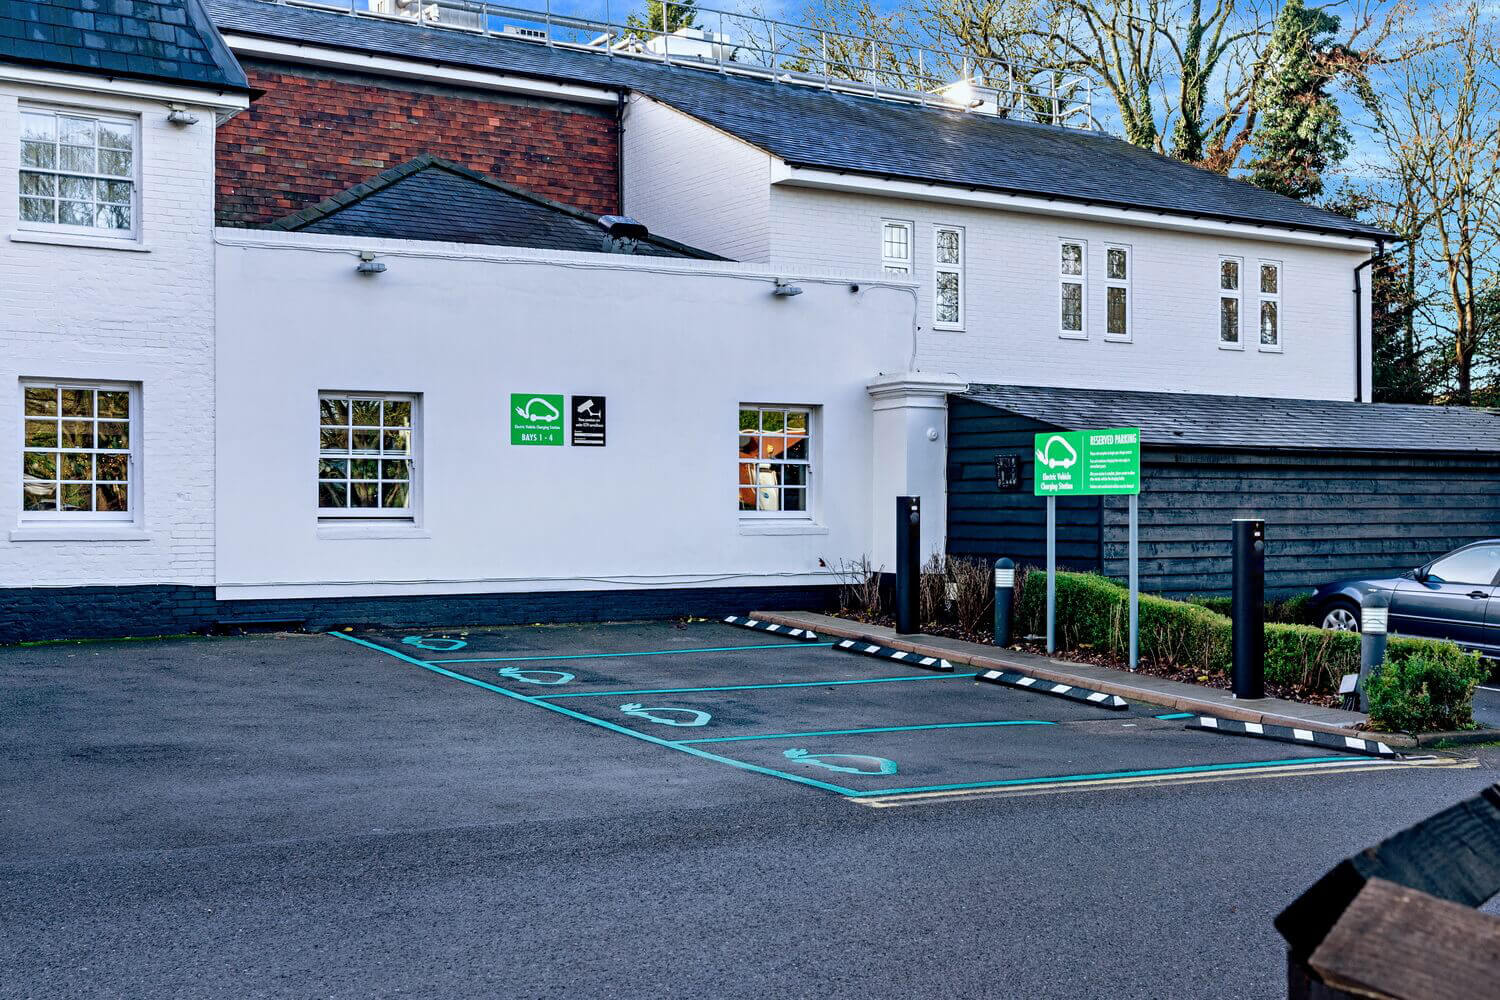 Ev charging spaces at the bull hotel